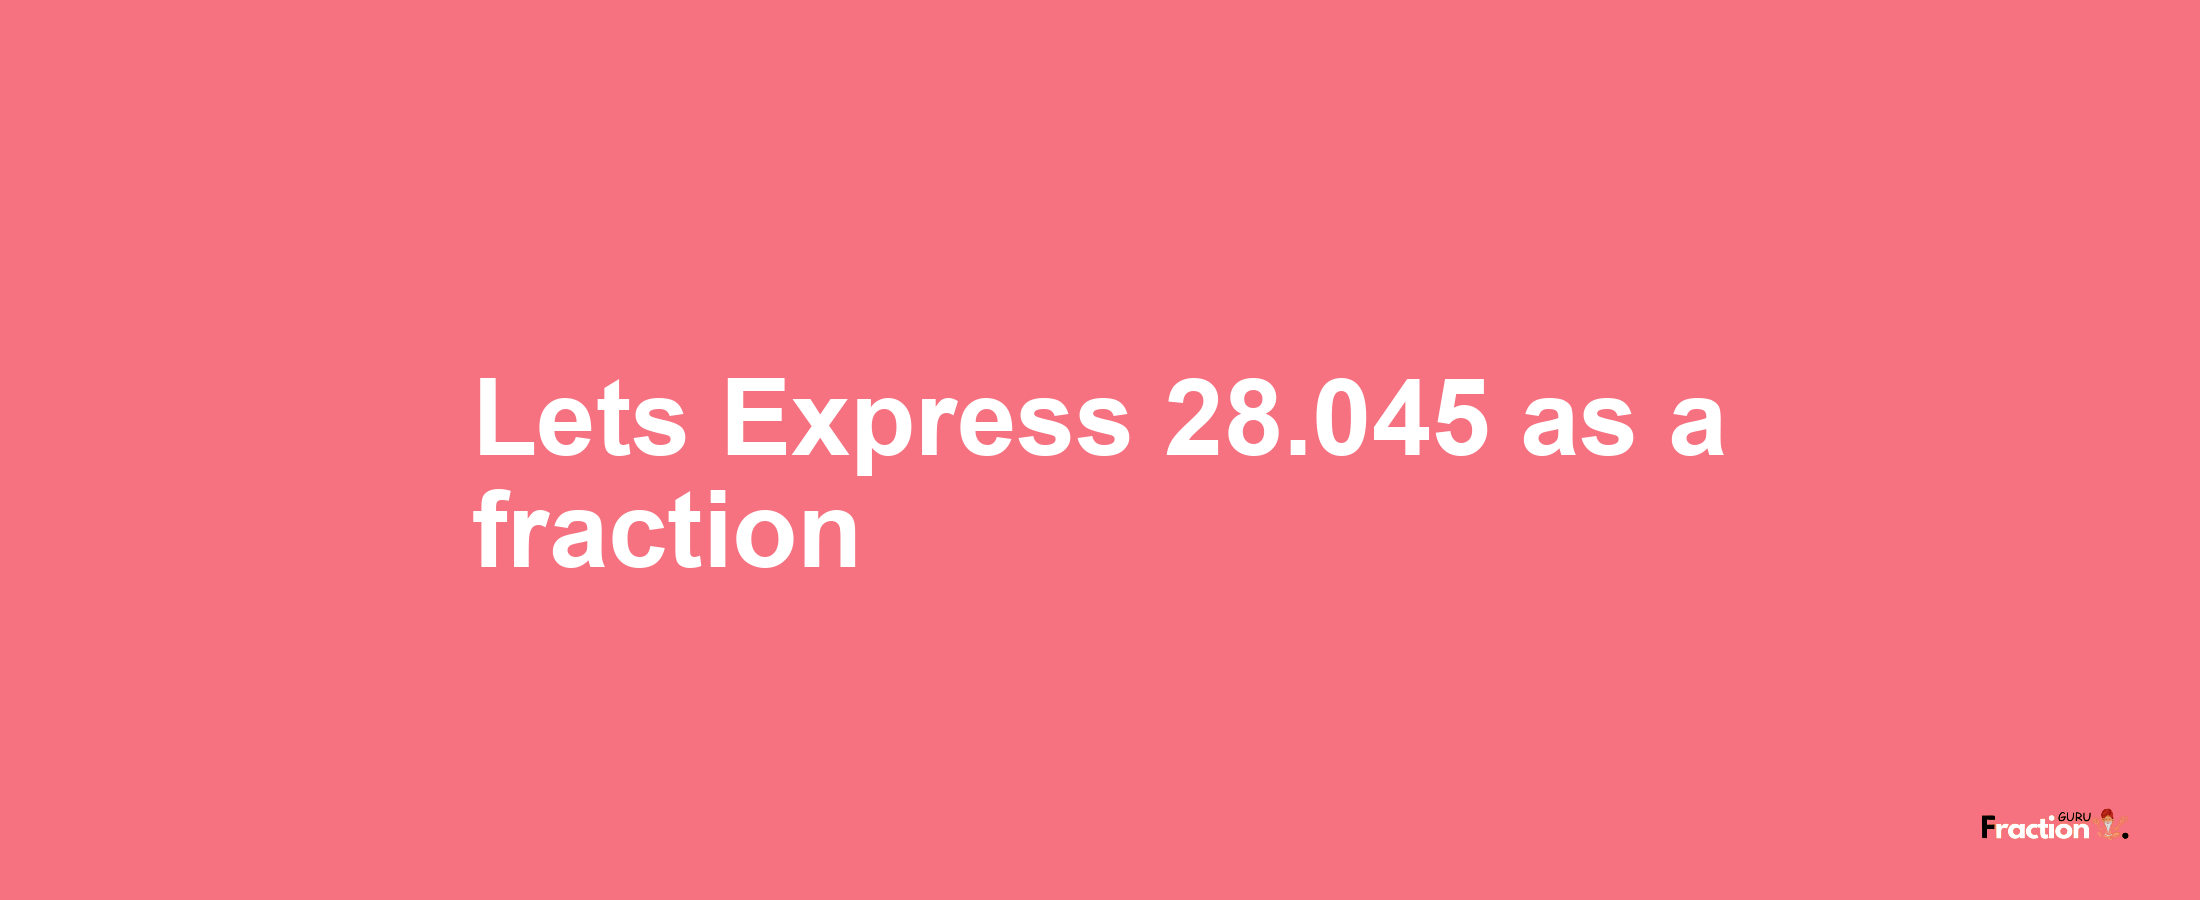 Lets Express 28.045 as afraction